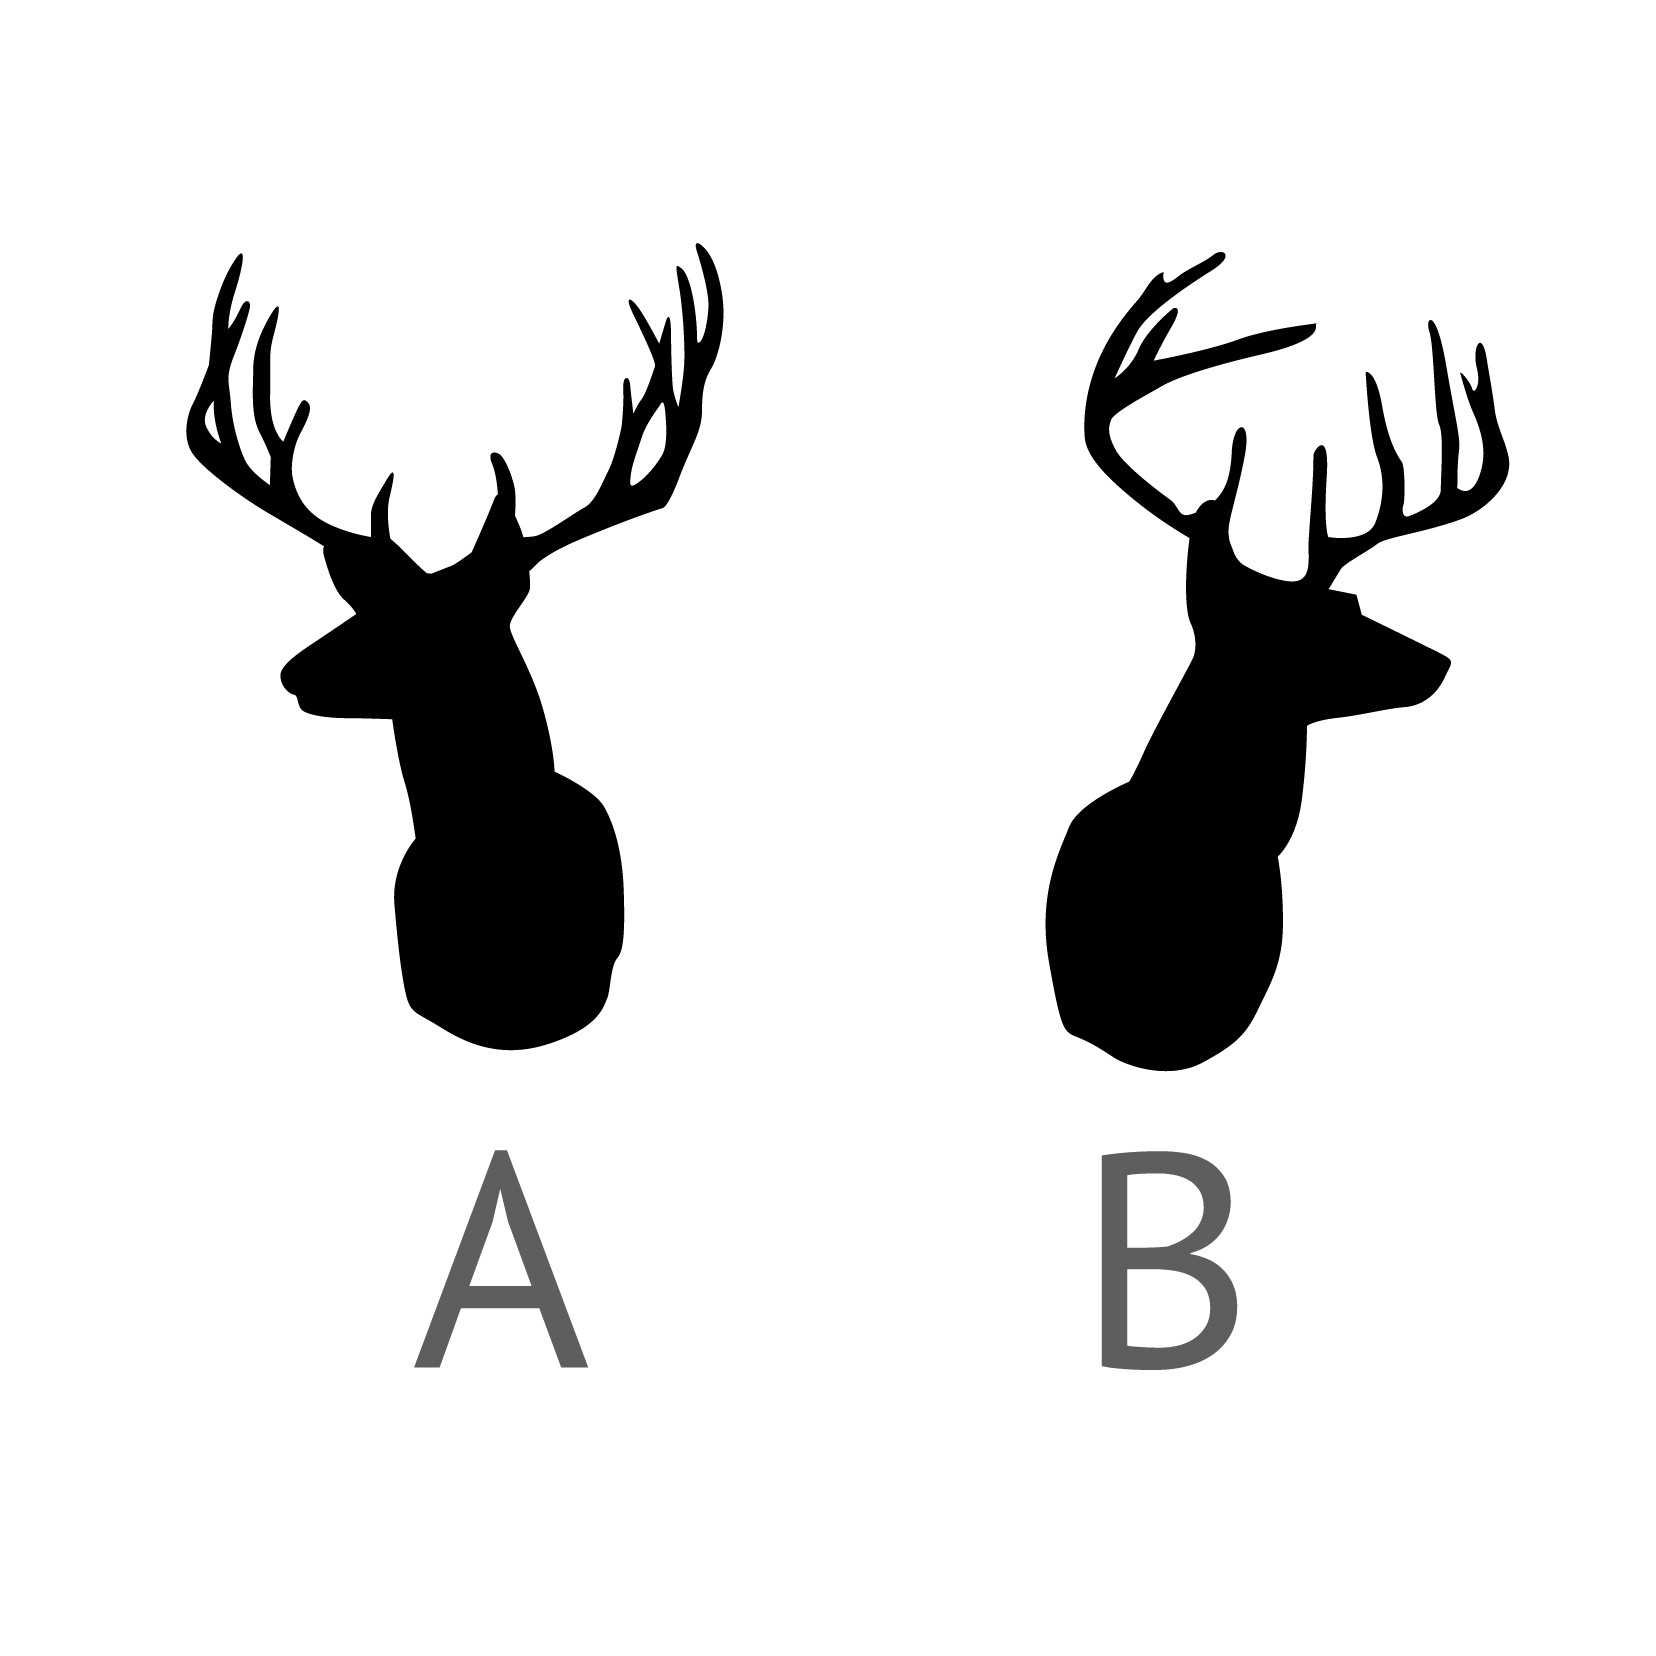 Deer with antlers silhouette clipart vector free 